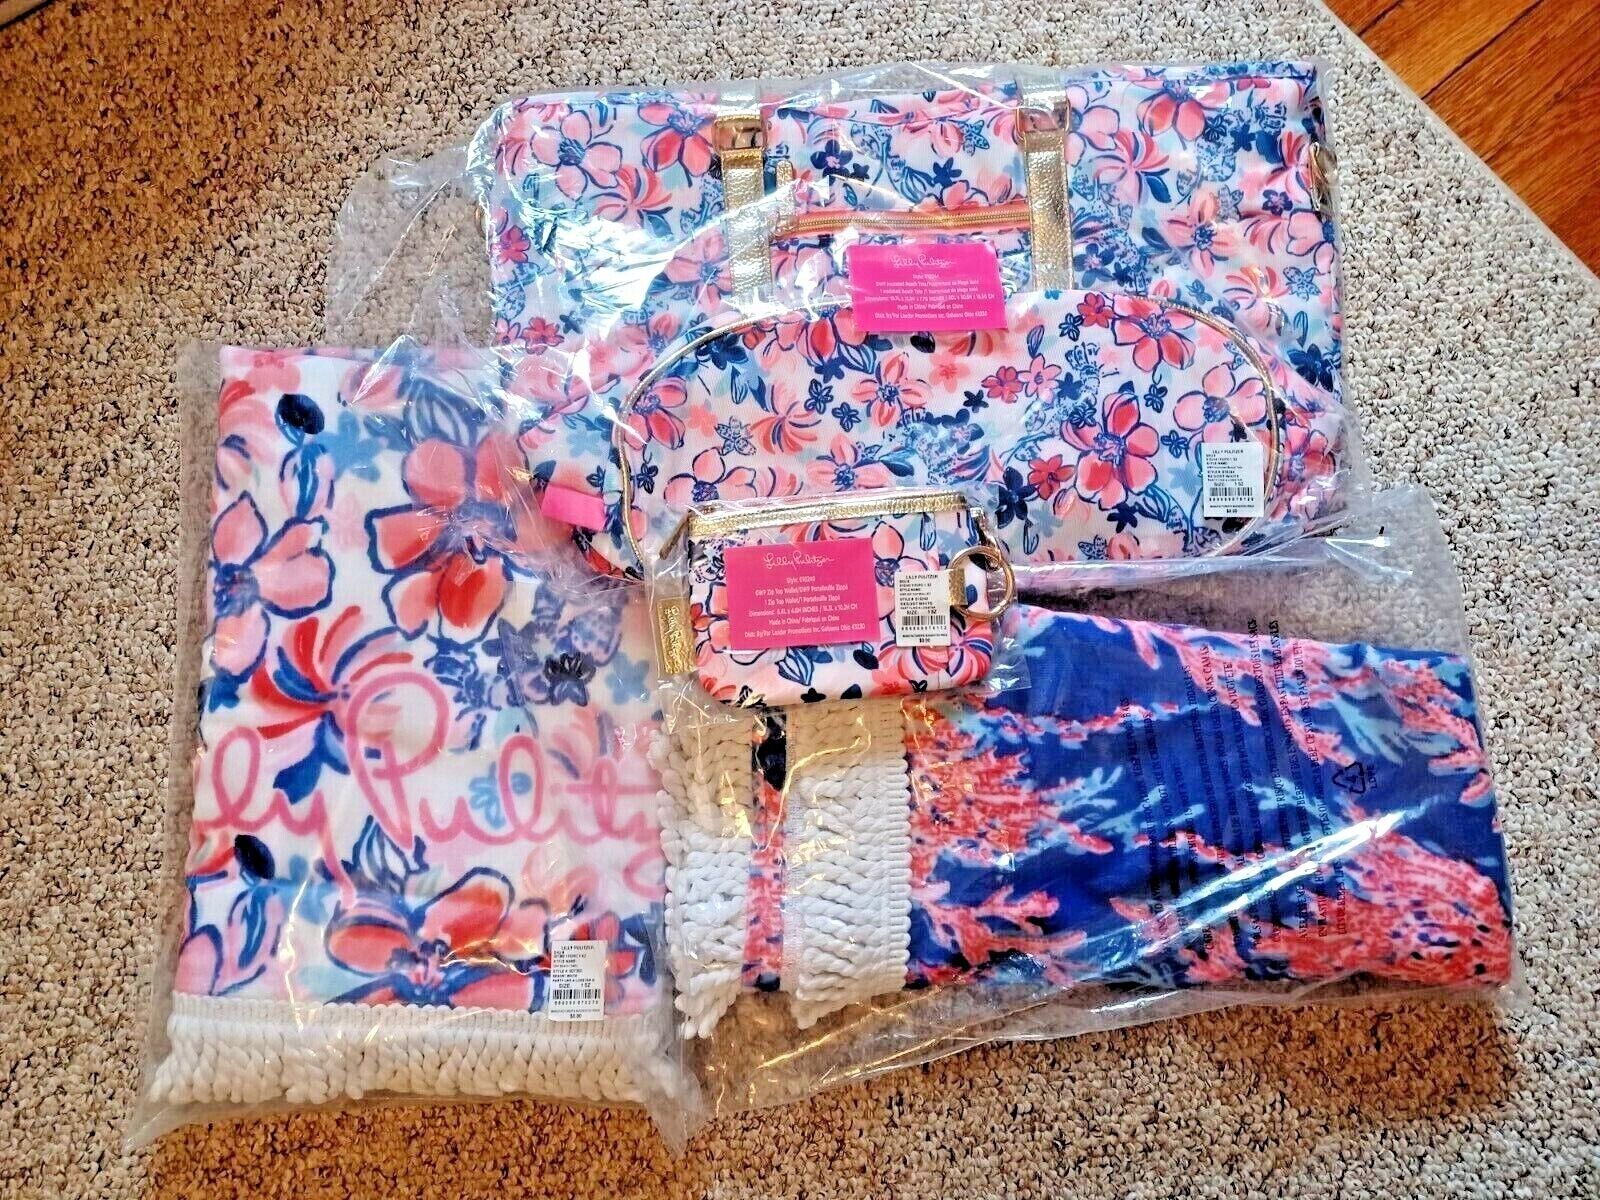 NWT SET LILLY PULITZER INSULATED TOTE BAG,2 BEACH TOWELS,1 COSMETIC POUCH PURSE  Lilly Pulitzer